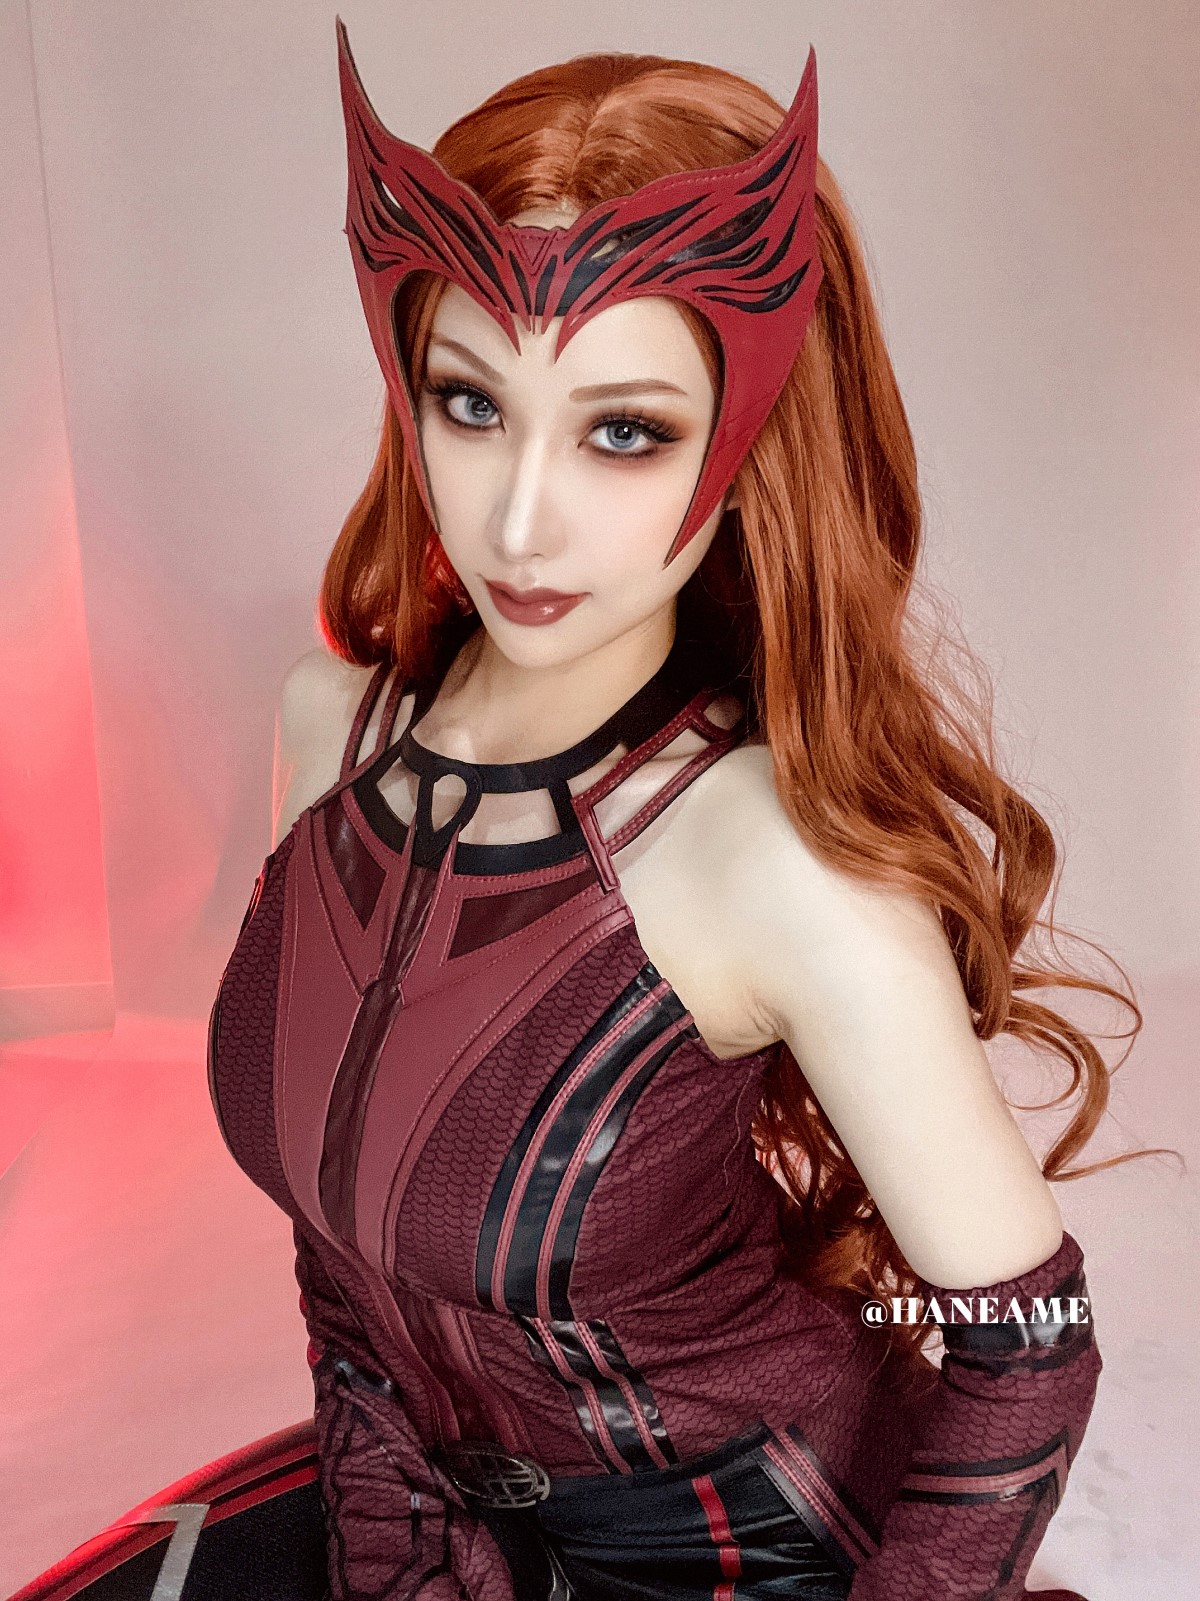 Coser@HaneAme Scarlet Witch 0034 9813587351.jpg